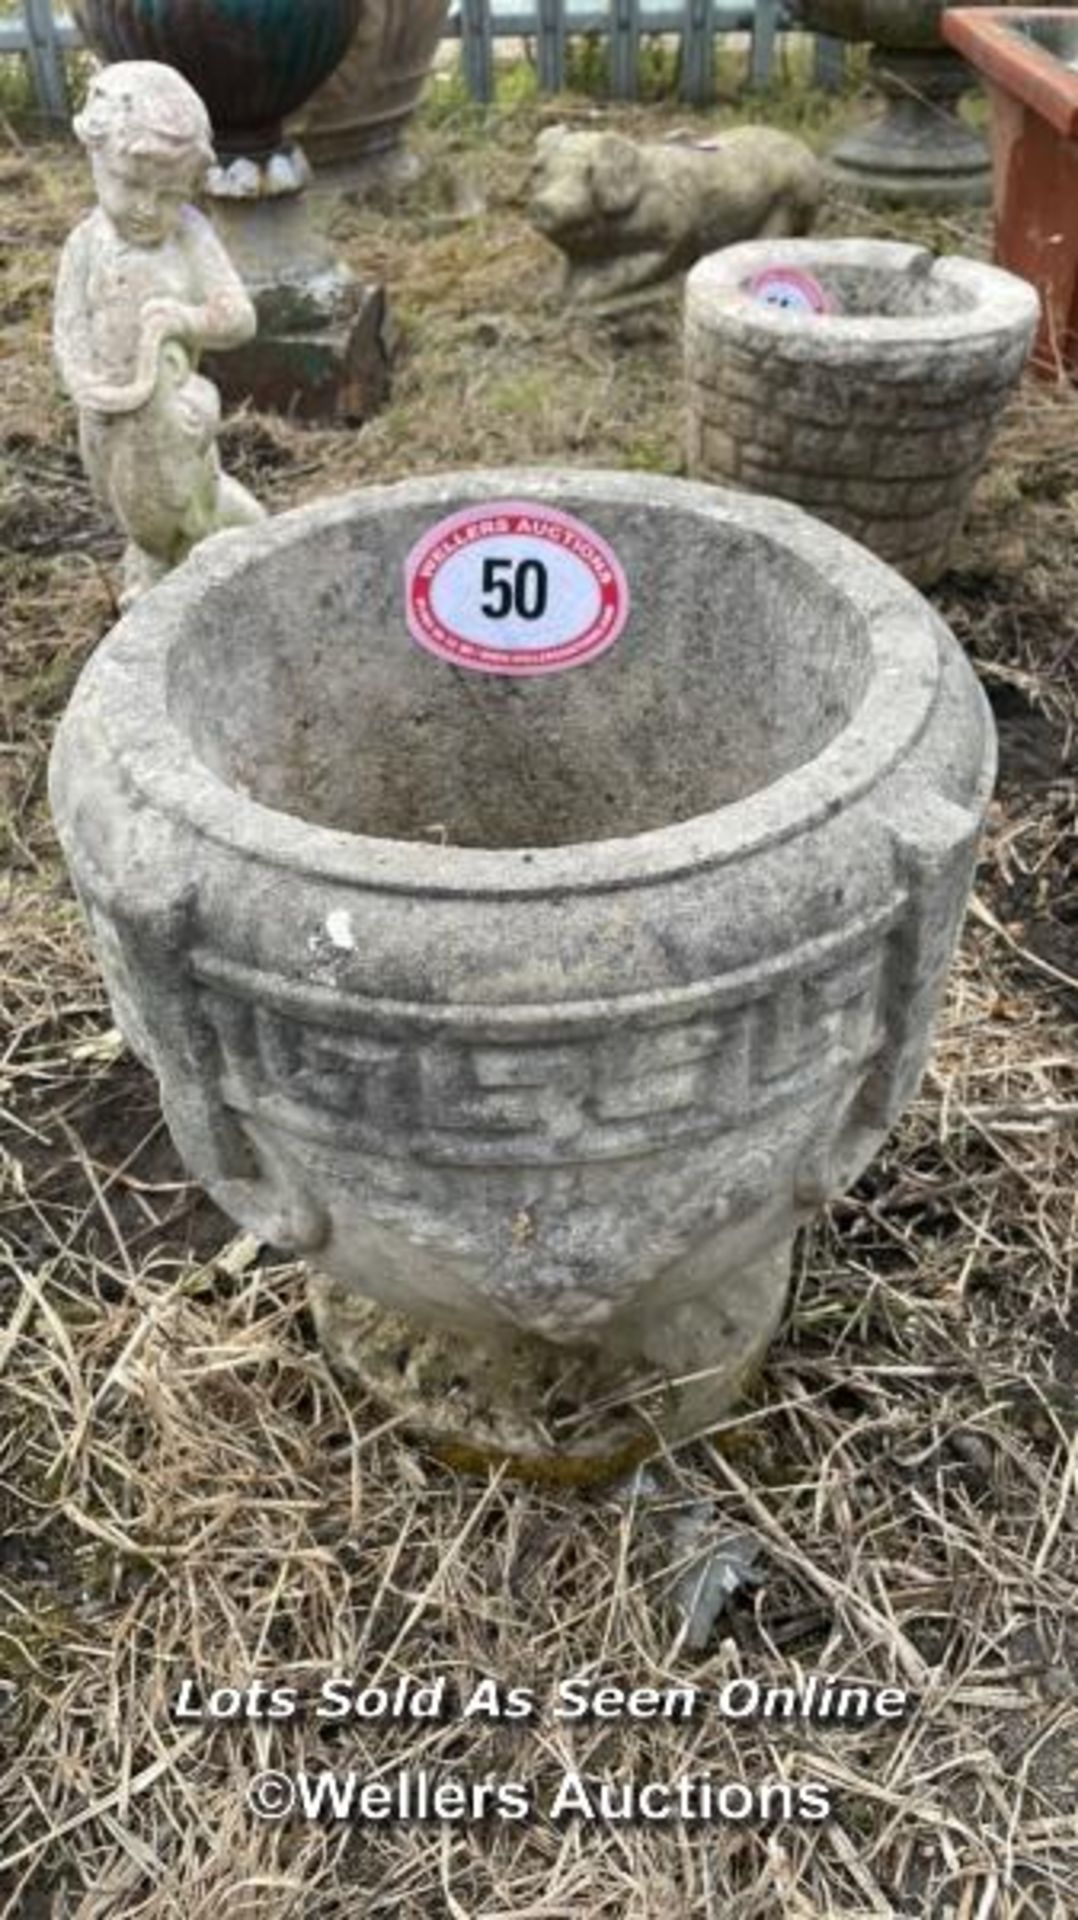 *RECONSTITUTED STONE GREEK STYLE PLANTER, 40CM (H) X 38CM (D) / COLLECTION LOCATION: ALBOURNE (BN6), - Image 3 of 3